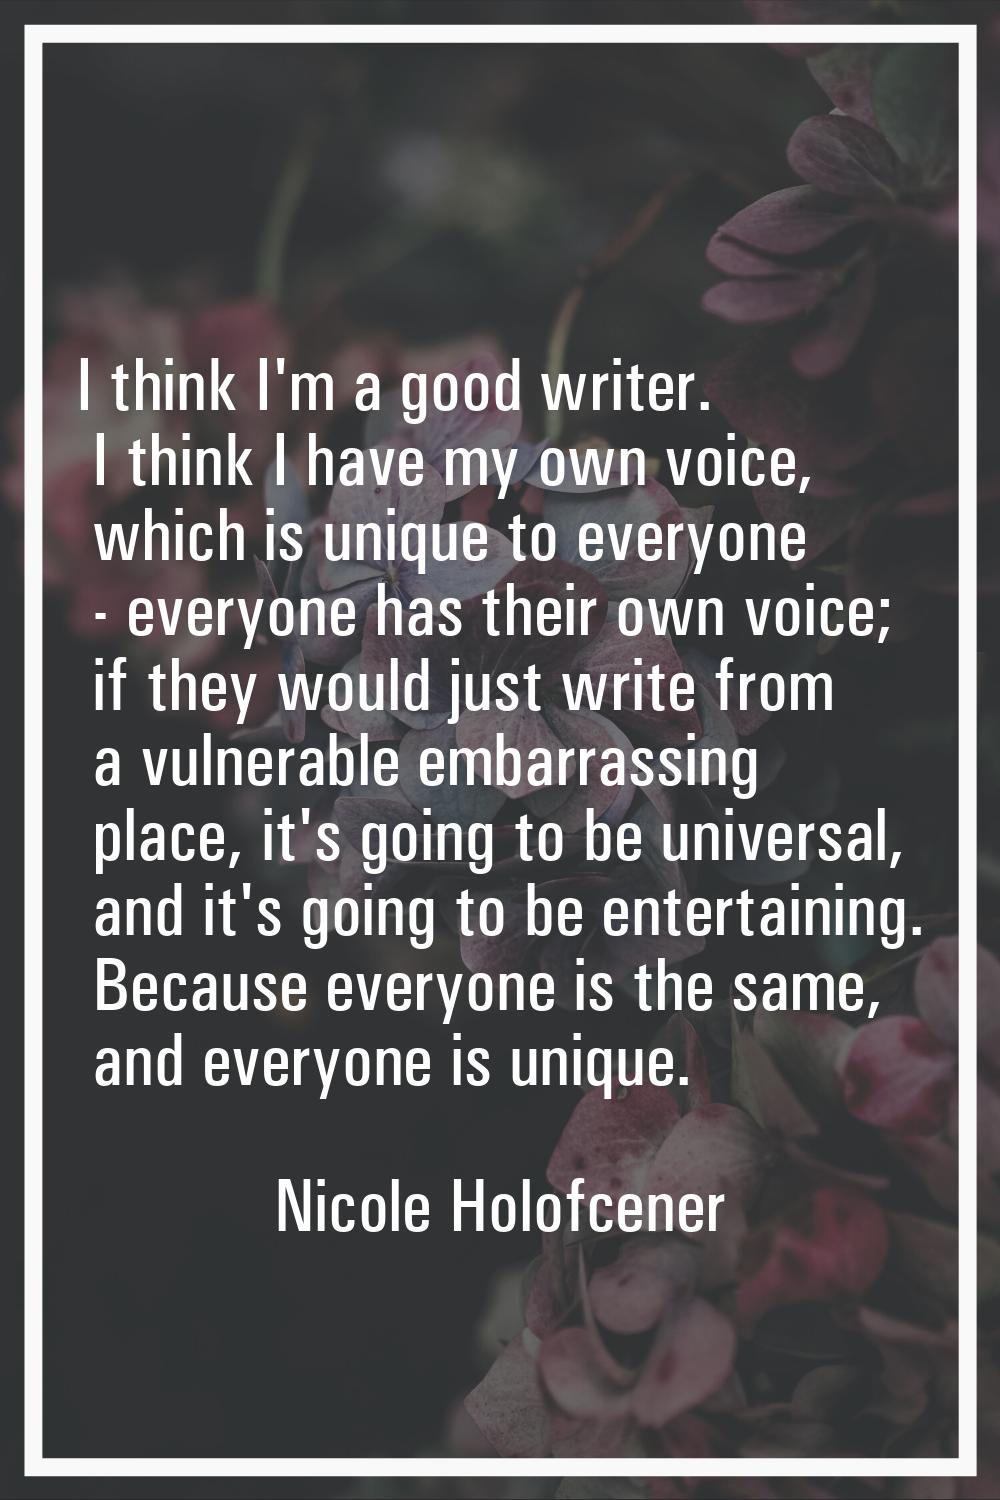 I think I'm a good writer. I think I have my own voice, which is unique to everyone - everyone has 